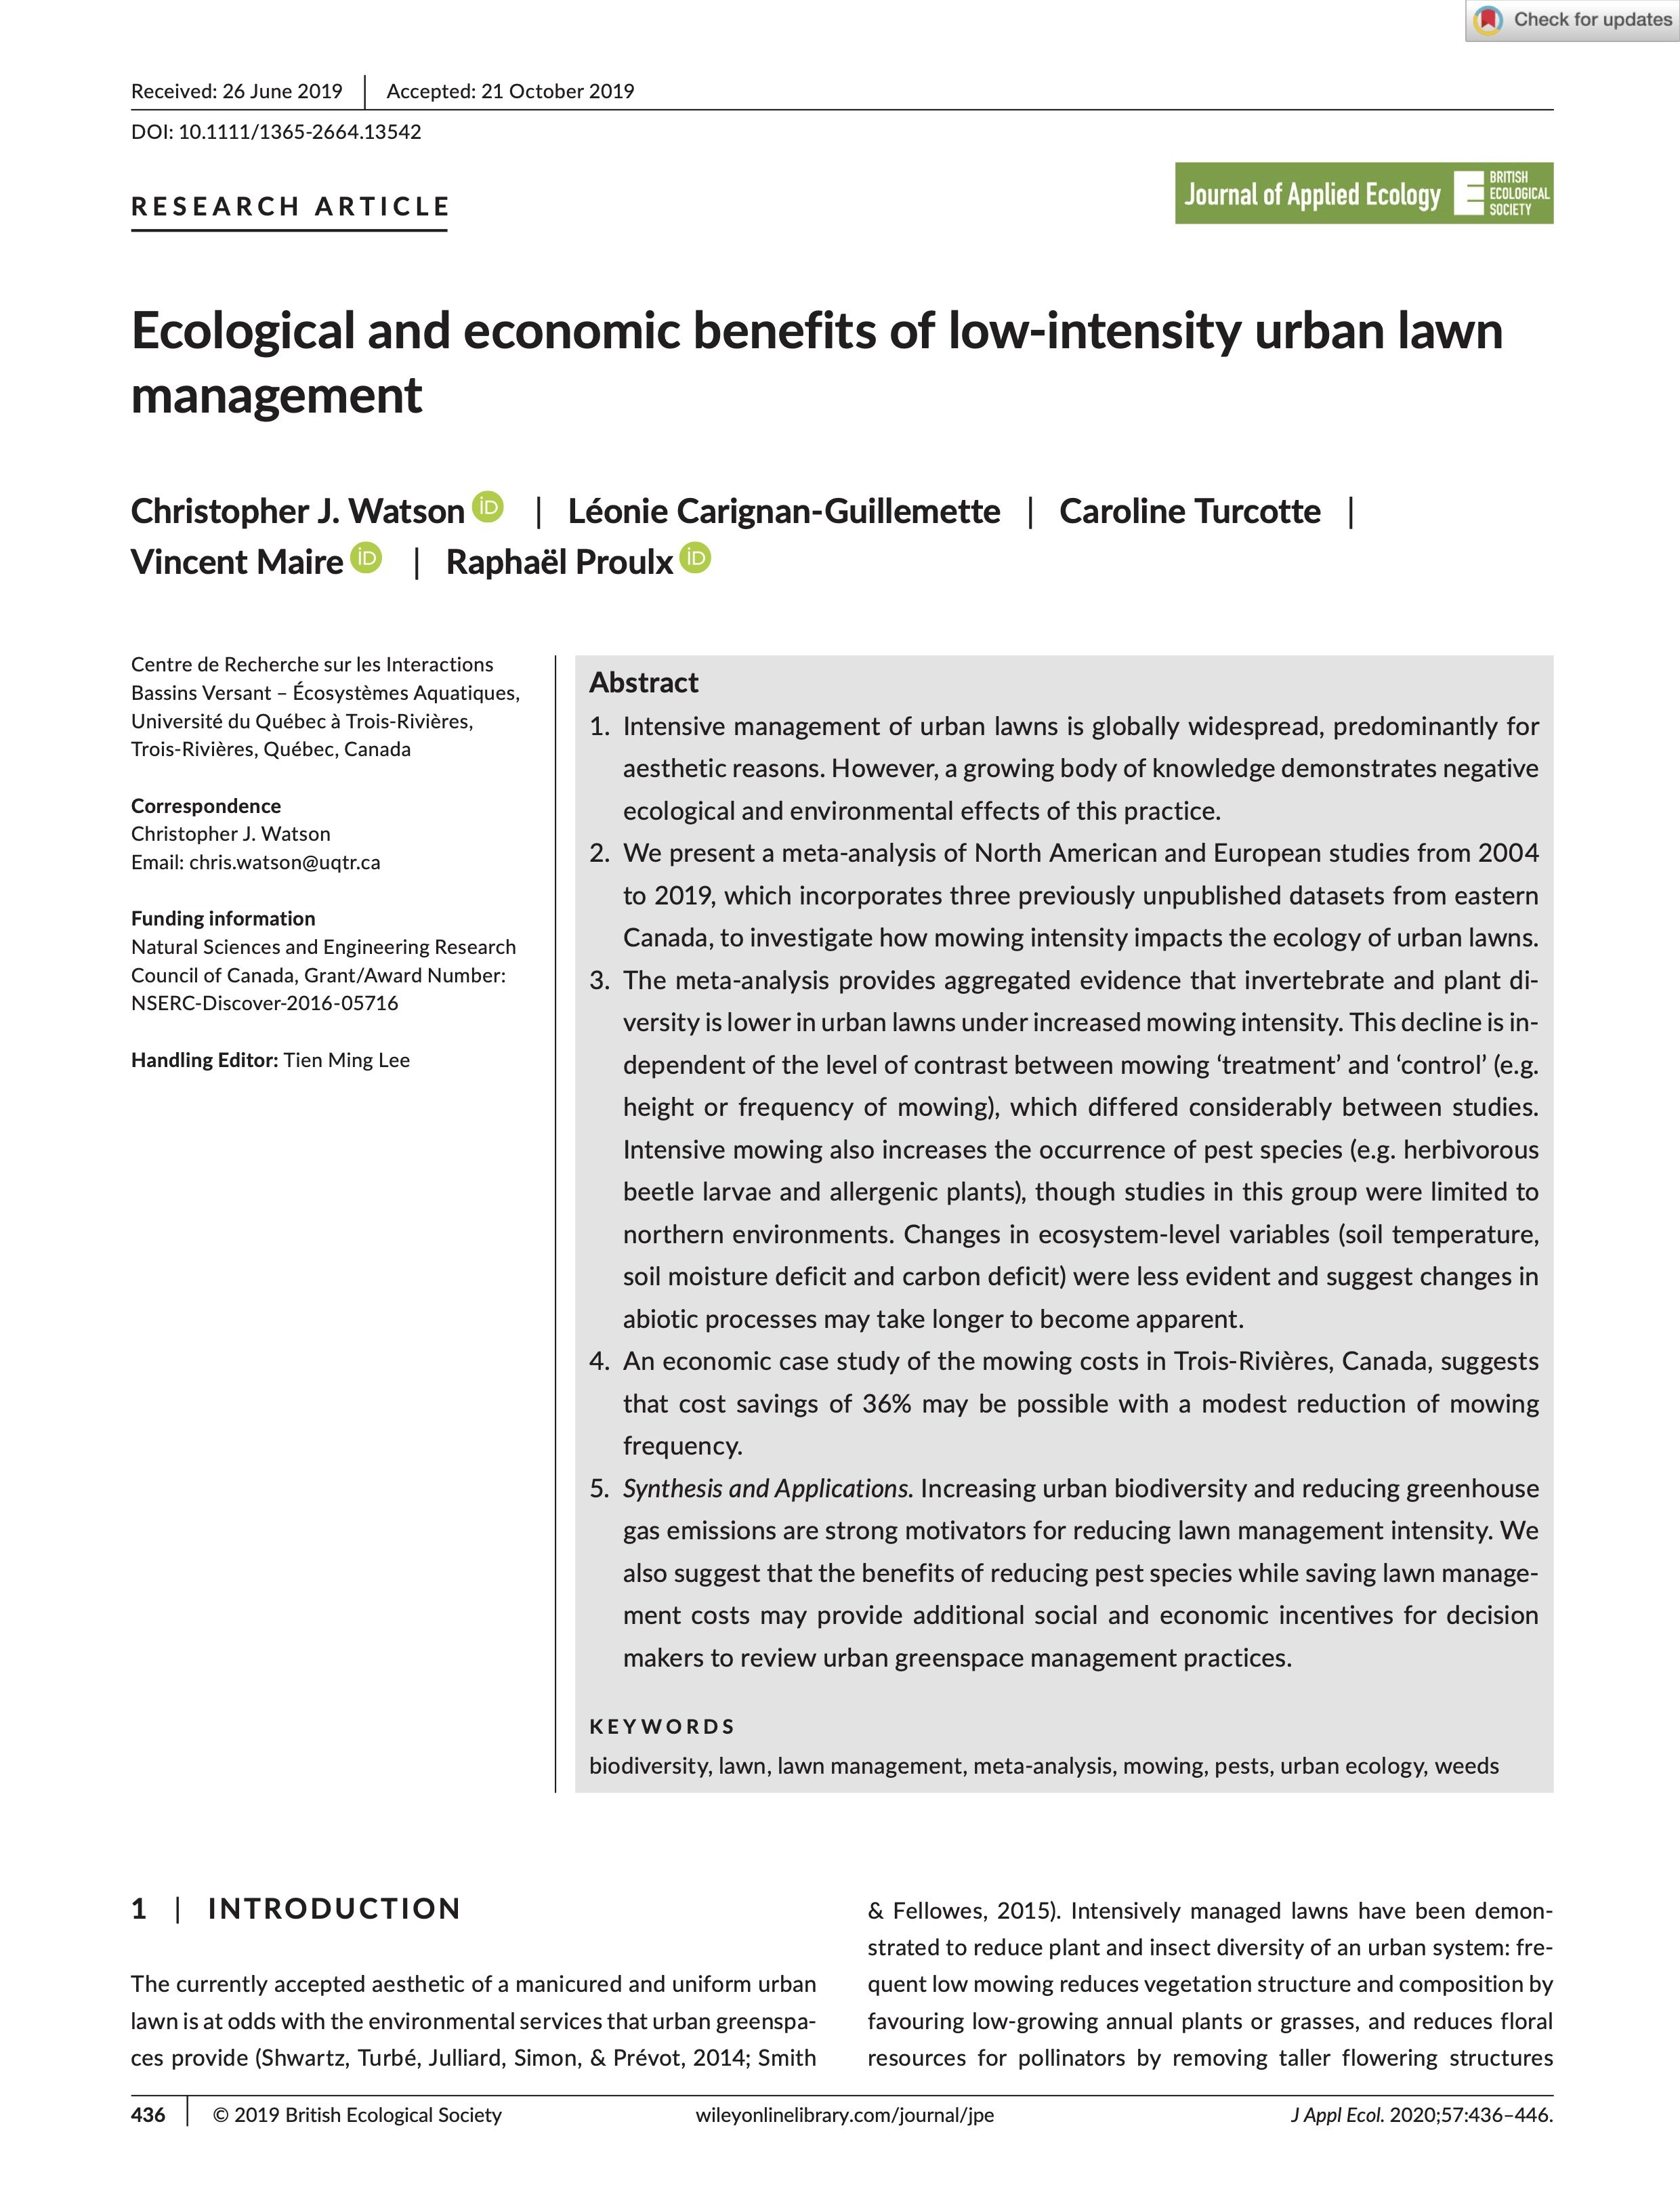 Ecological and economic benefits of low-intensity urban lawn management